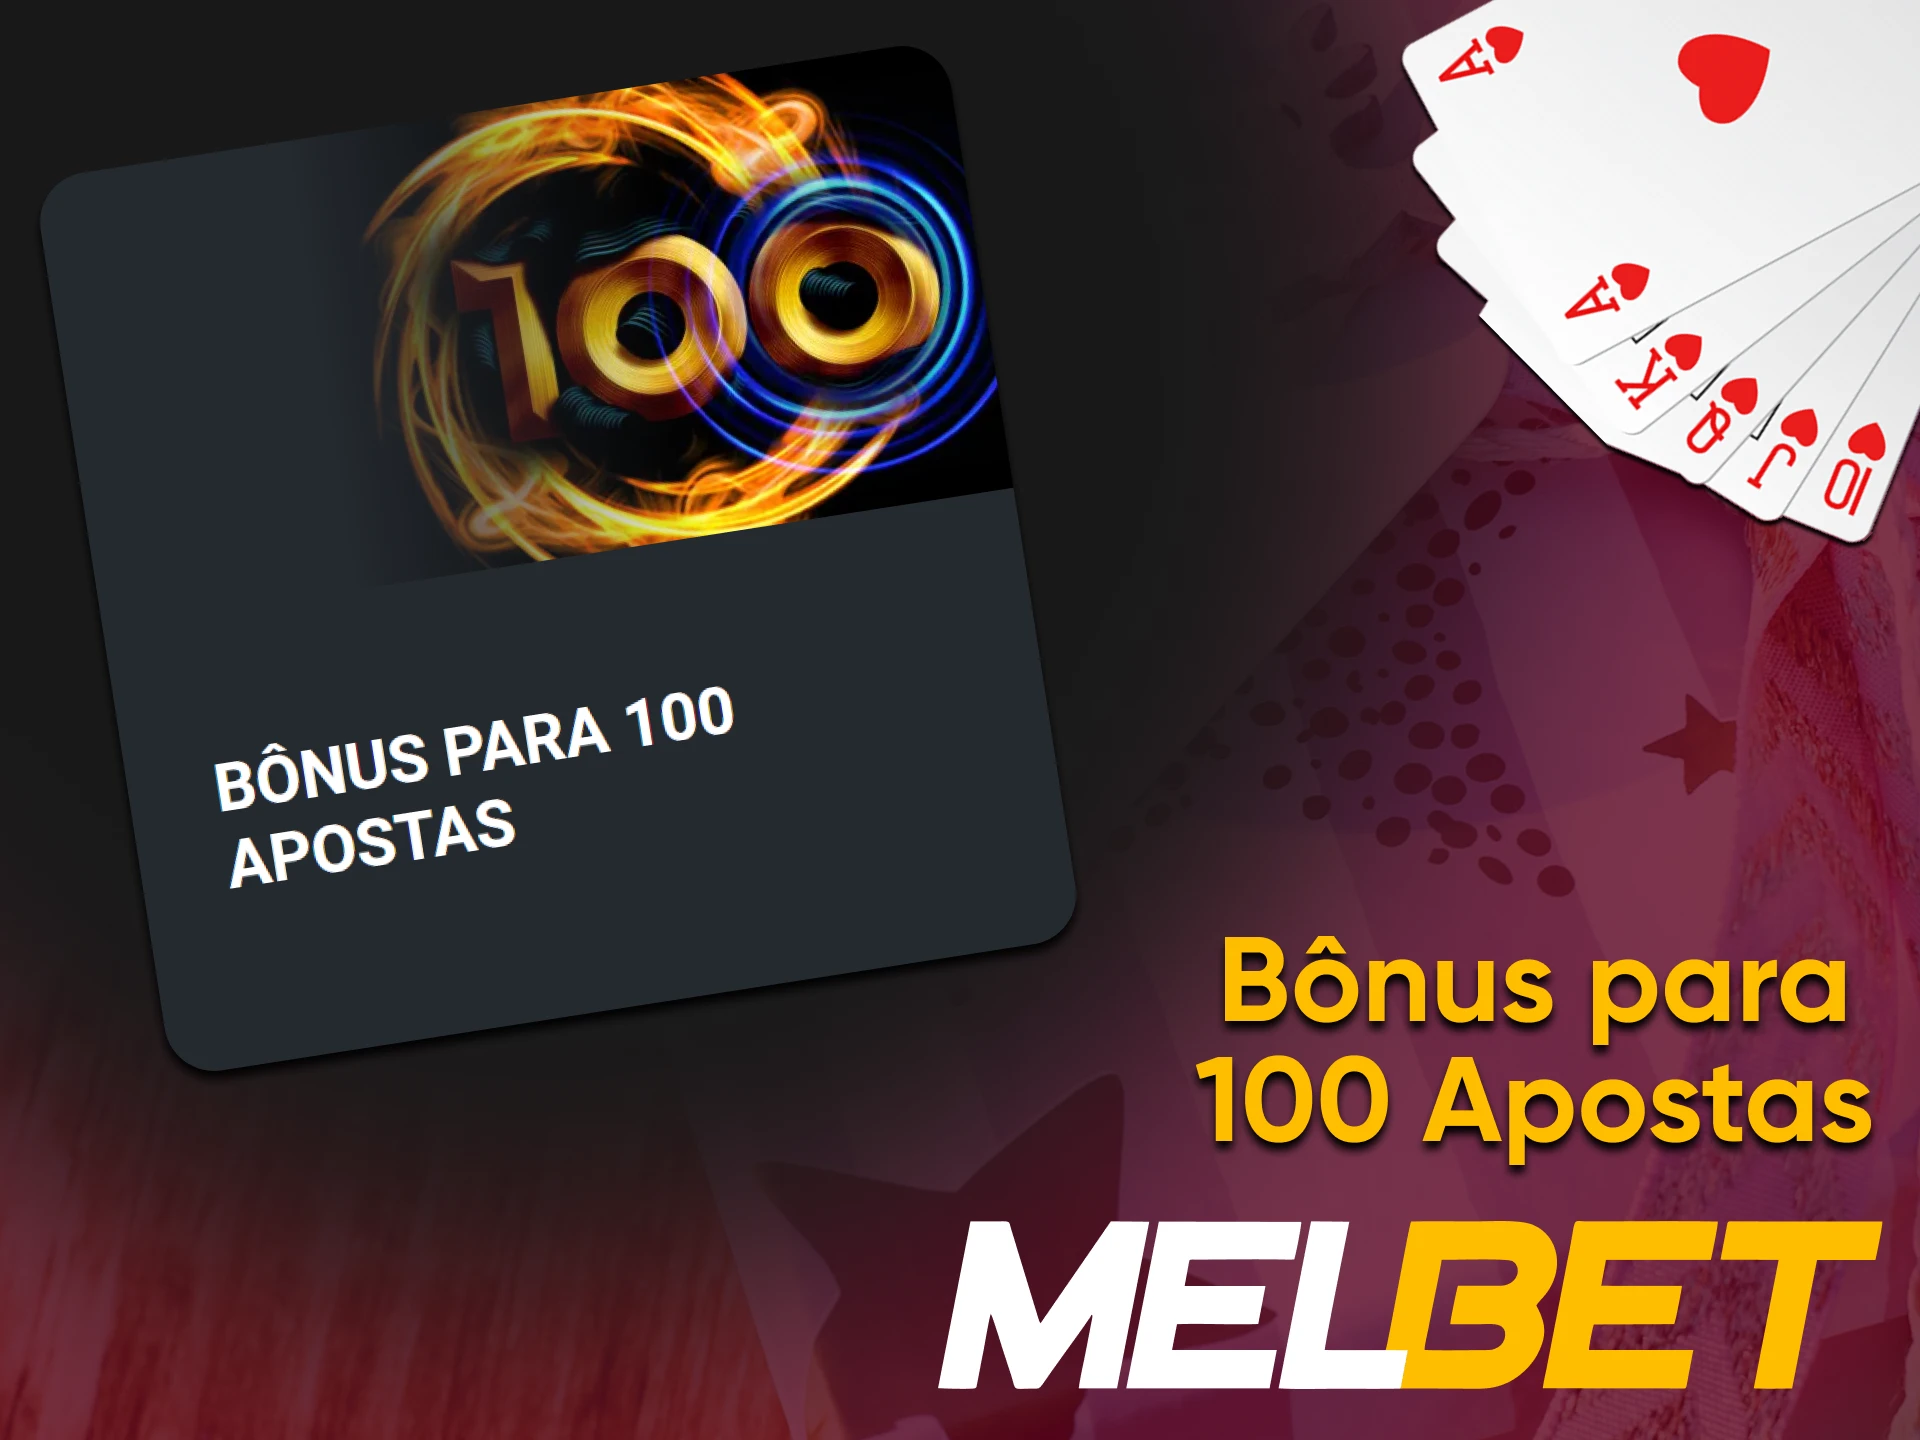 For an extra bonus, place more Melbet bets.